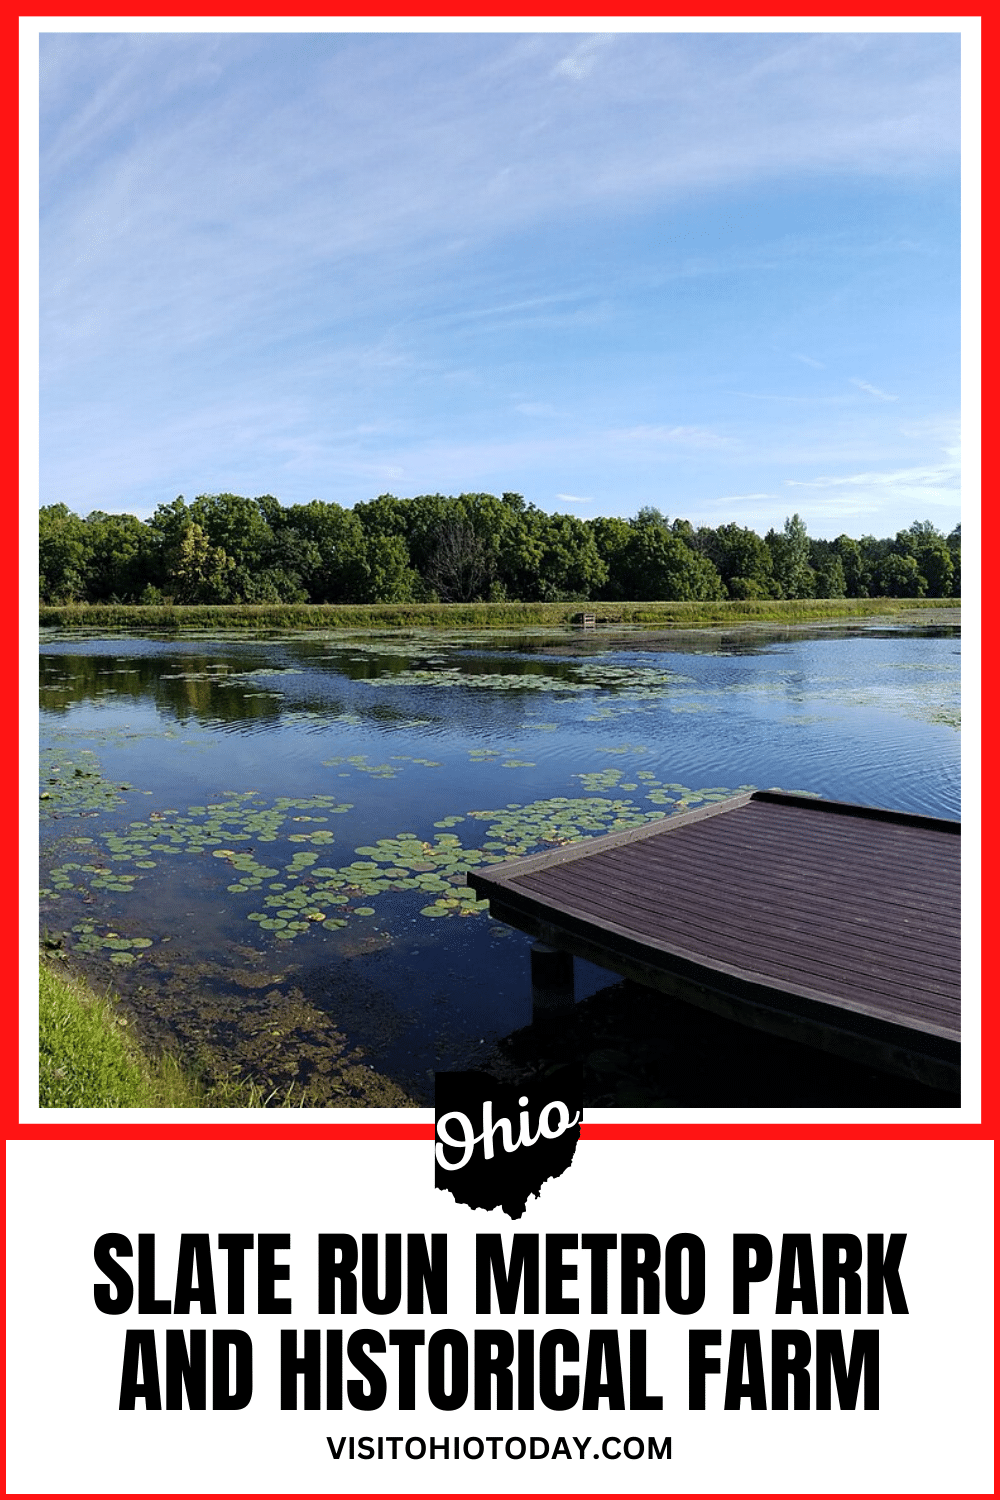 Slate Run Metro Park is a 1705+ acre park that features a variety of activities and wildlife. You can hike, walk, bike, visit a working farm and more! #slaterun #metropark #ohio #slaterunfarm